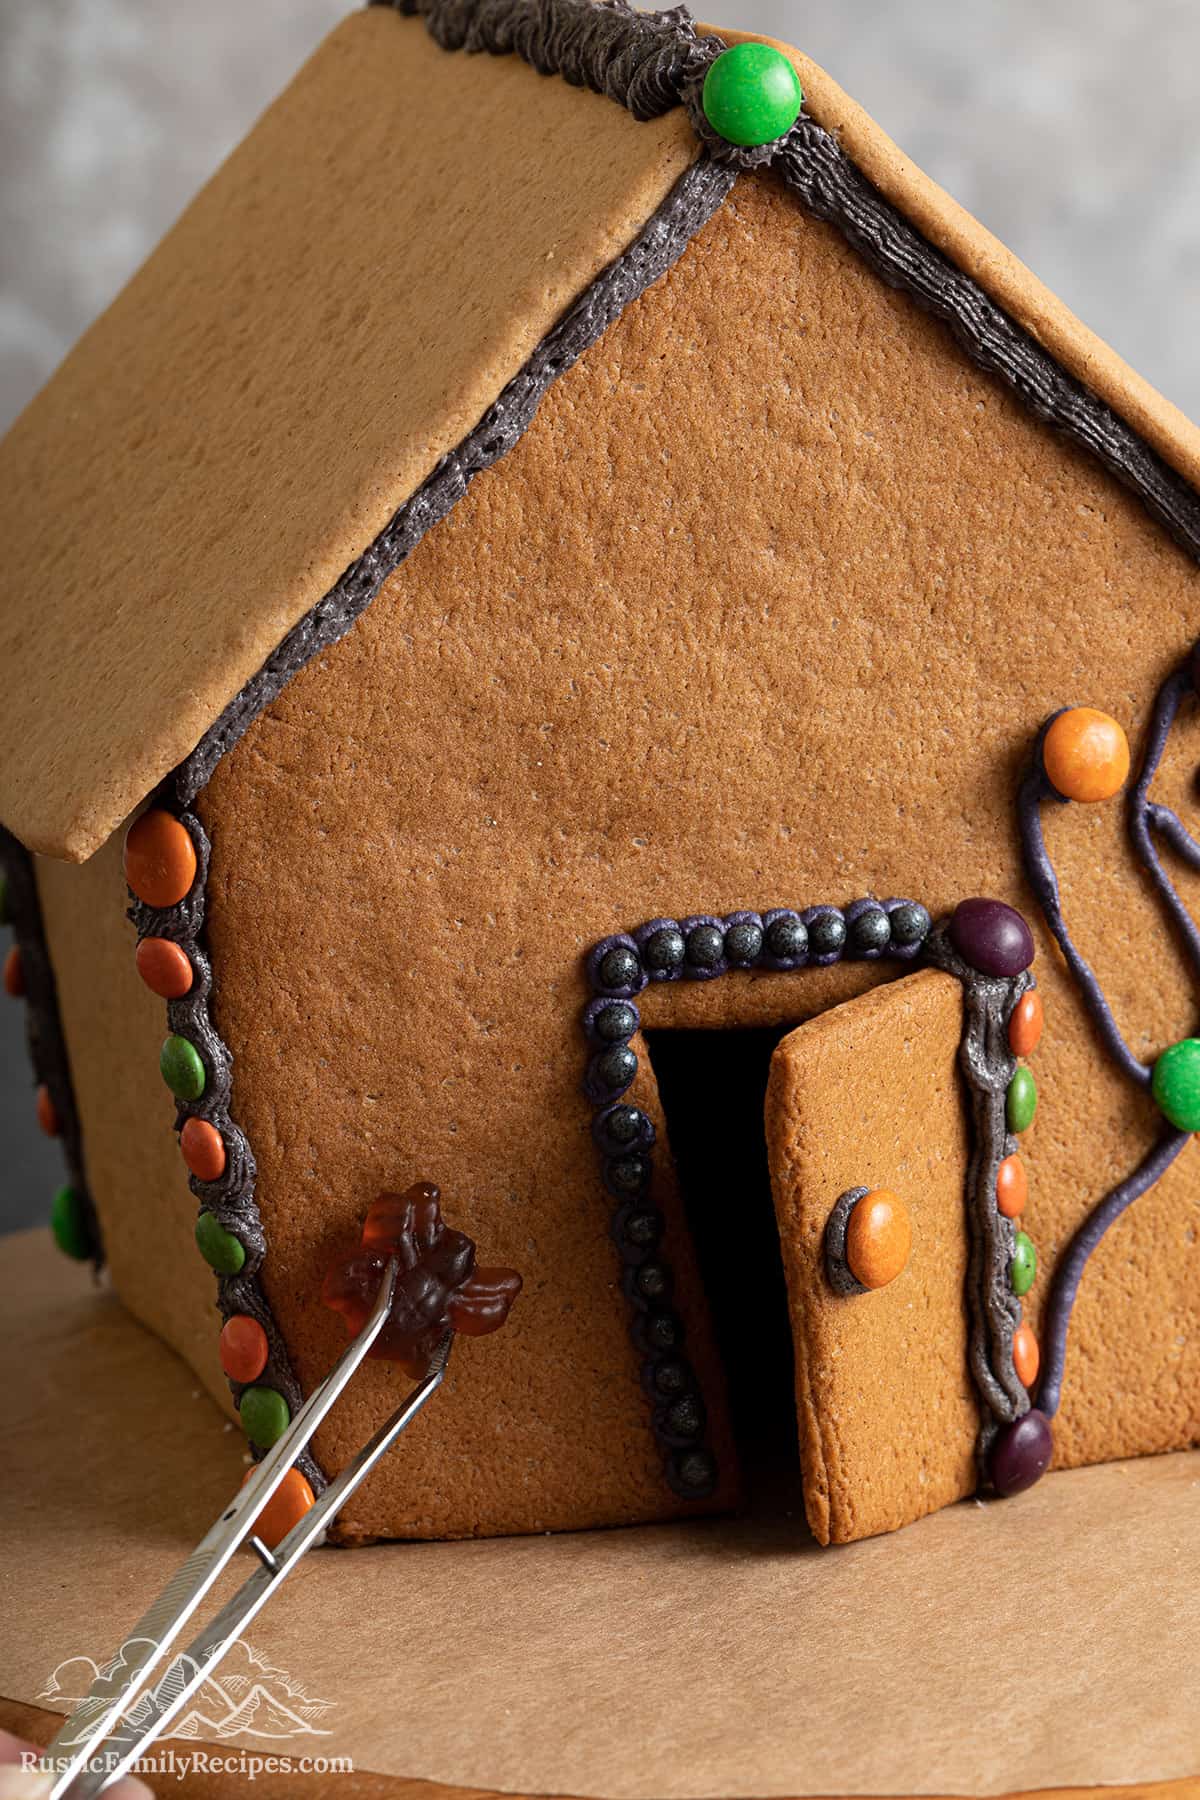 Adding gummy spiders to the gingerbread house.